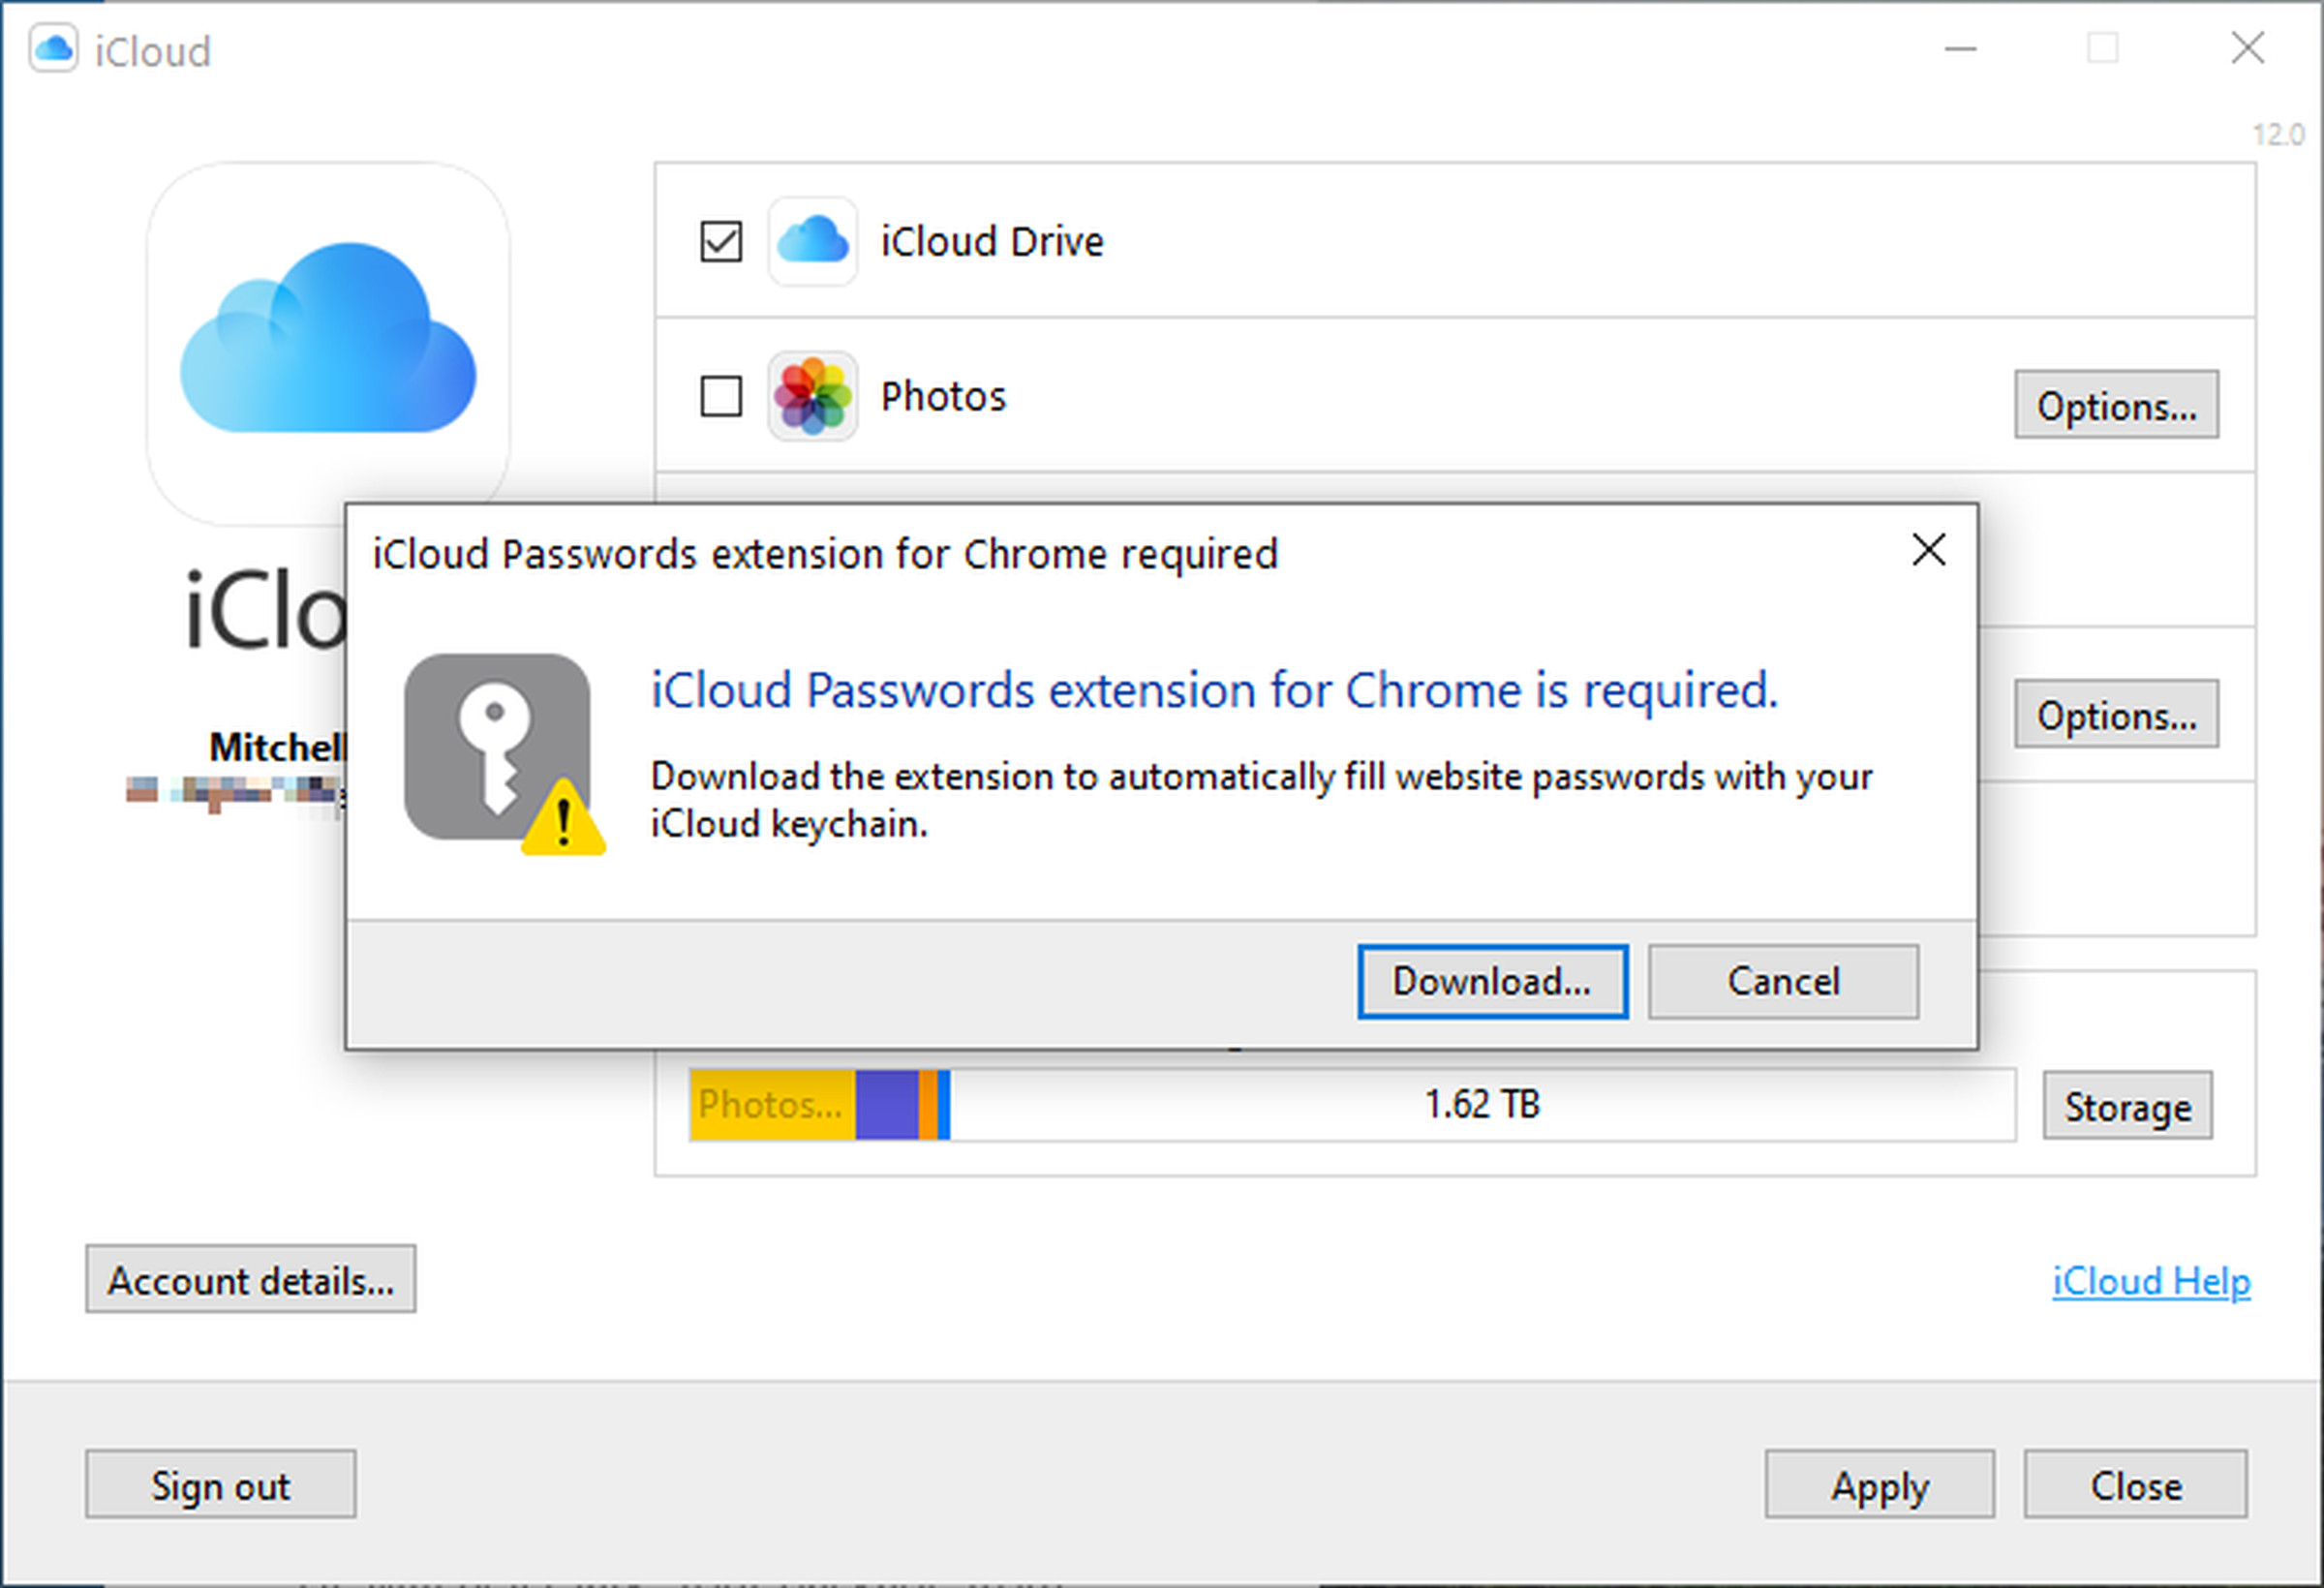 Windows dialog box informing the user that they have to download the iCloud Passwords extension